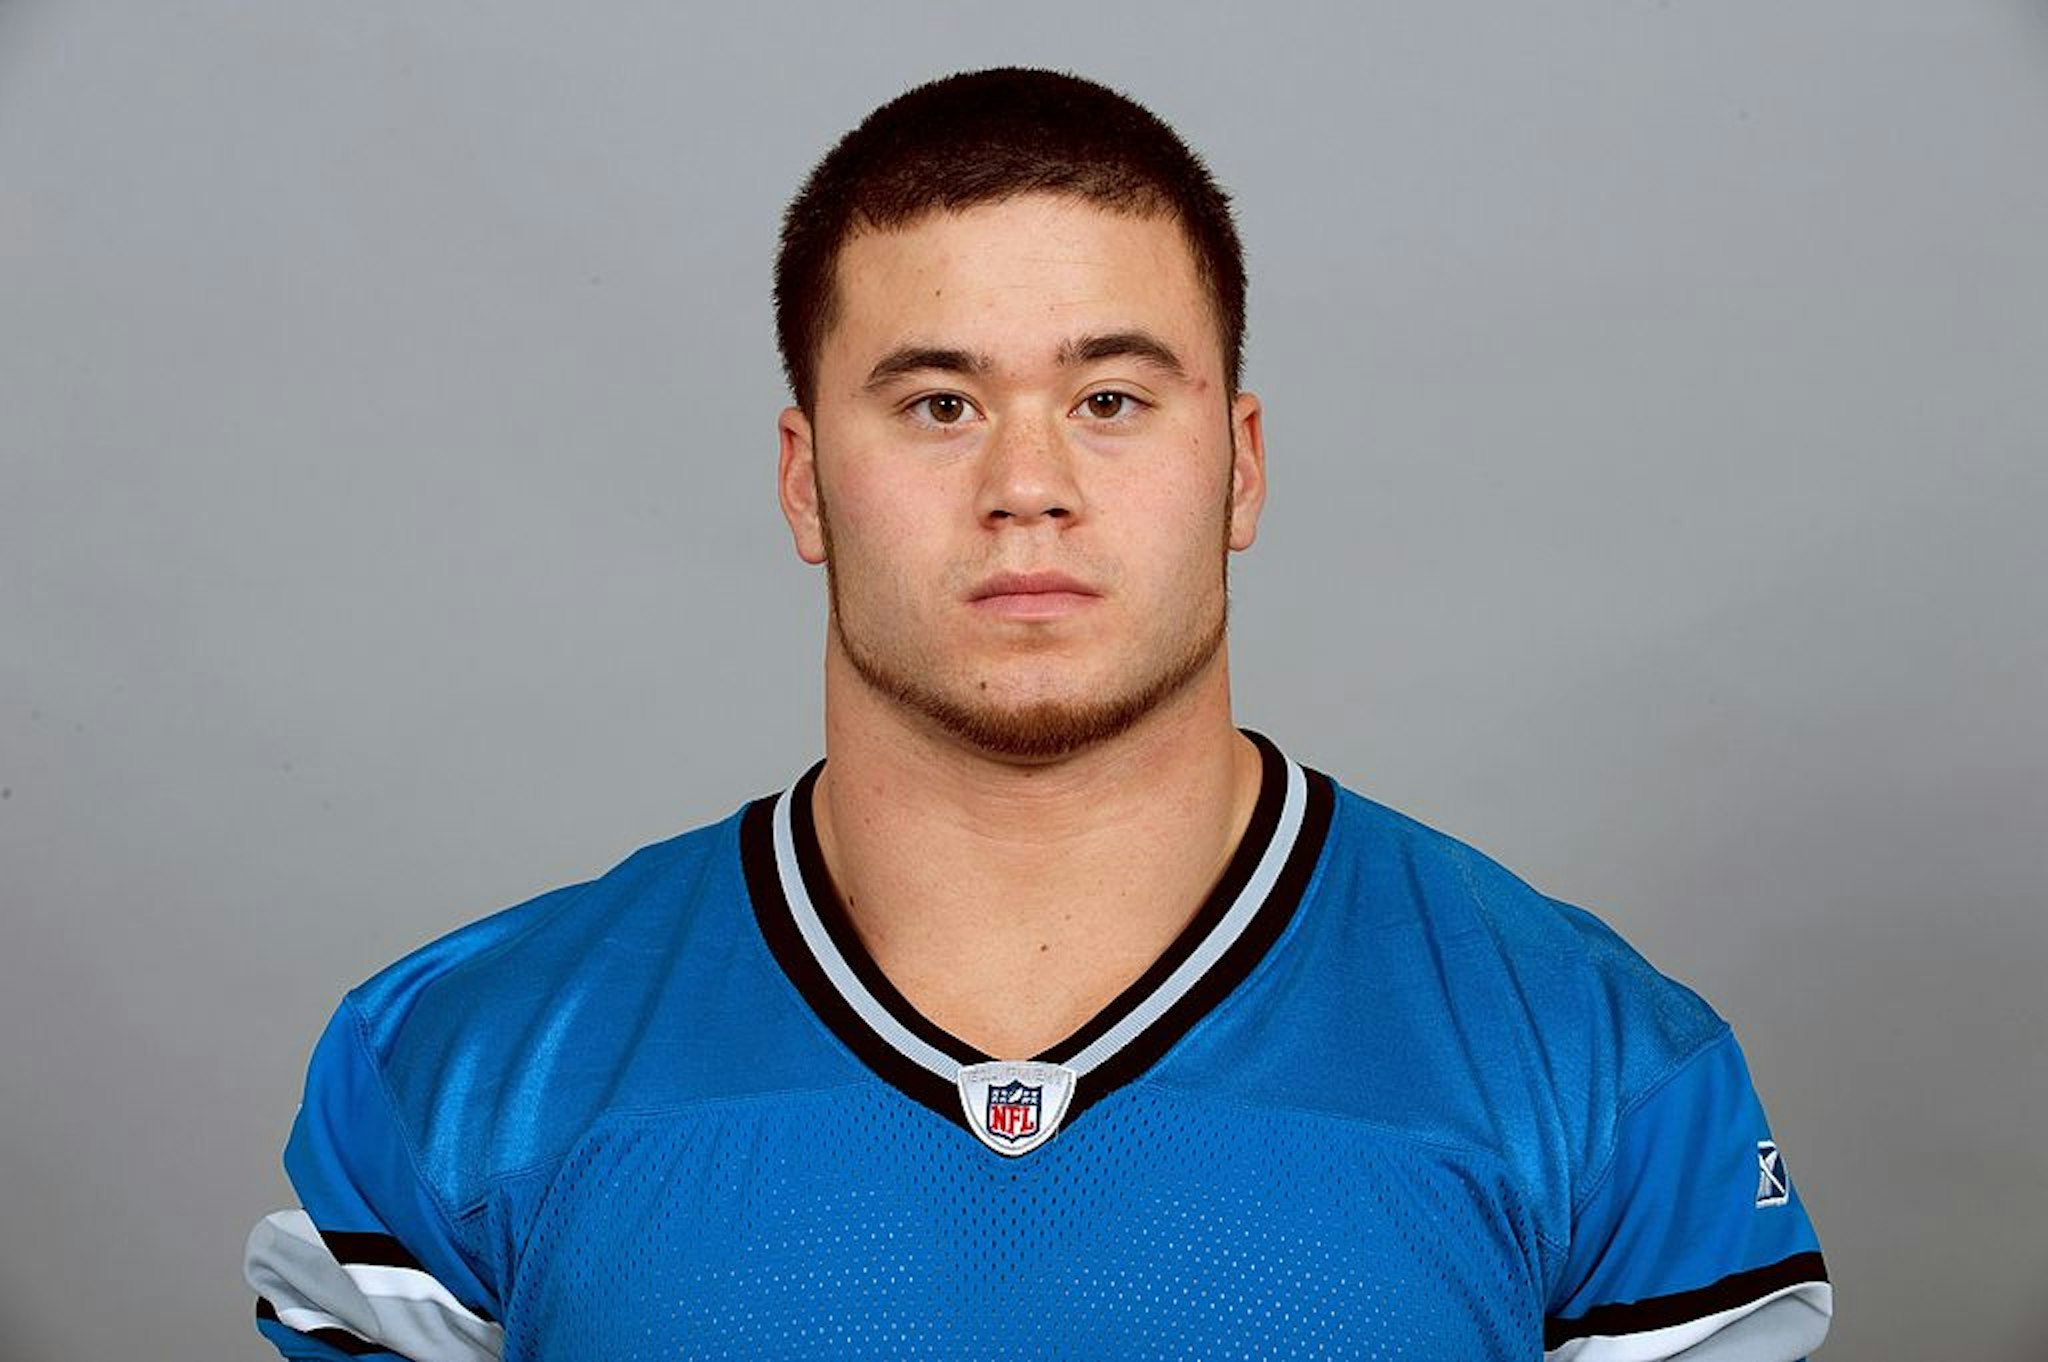 2009: Daniel Holtzclaw of the Detroit Lions poses for his 2009 NFL headshot at photo day in Detroit, Michigan.